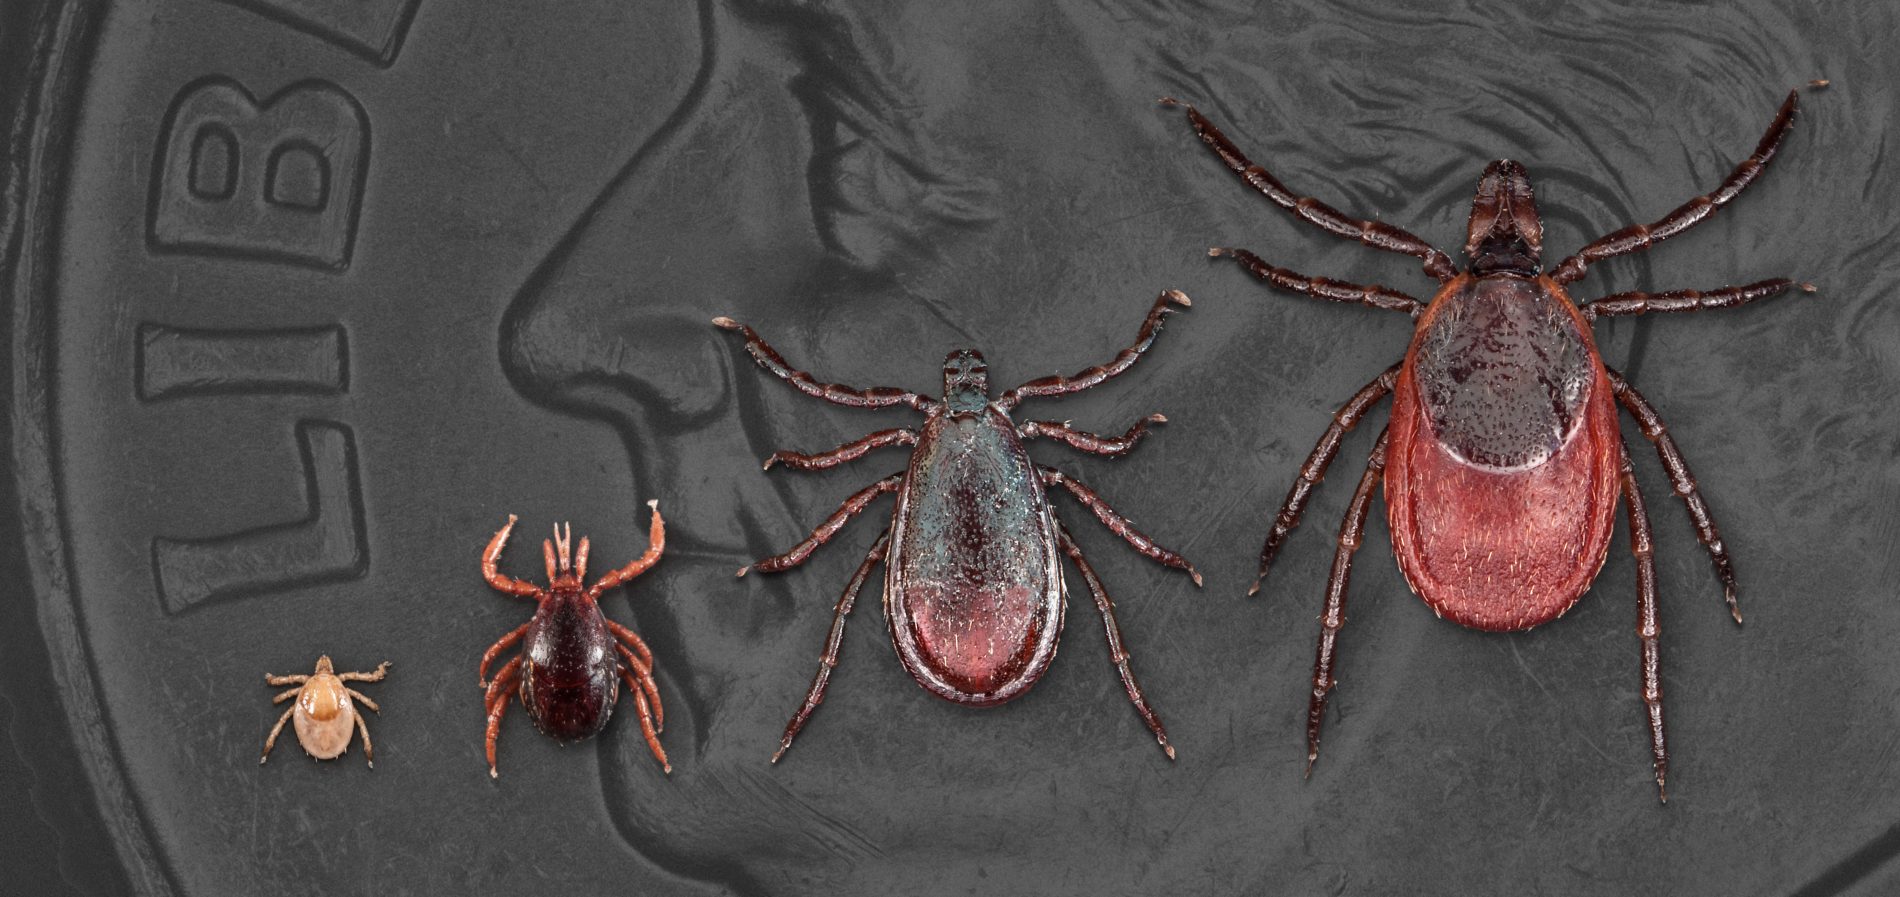 Blackledded tick life stages-CDC photo